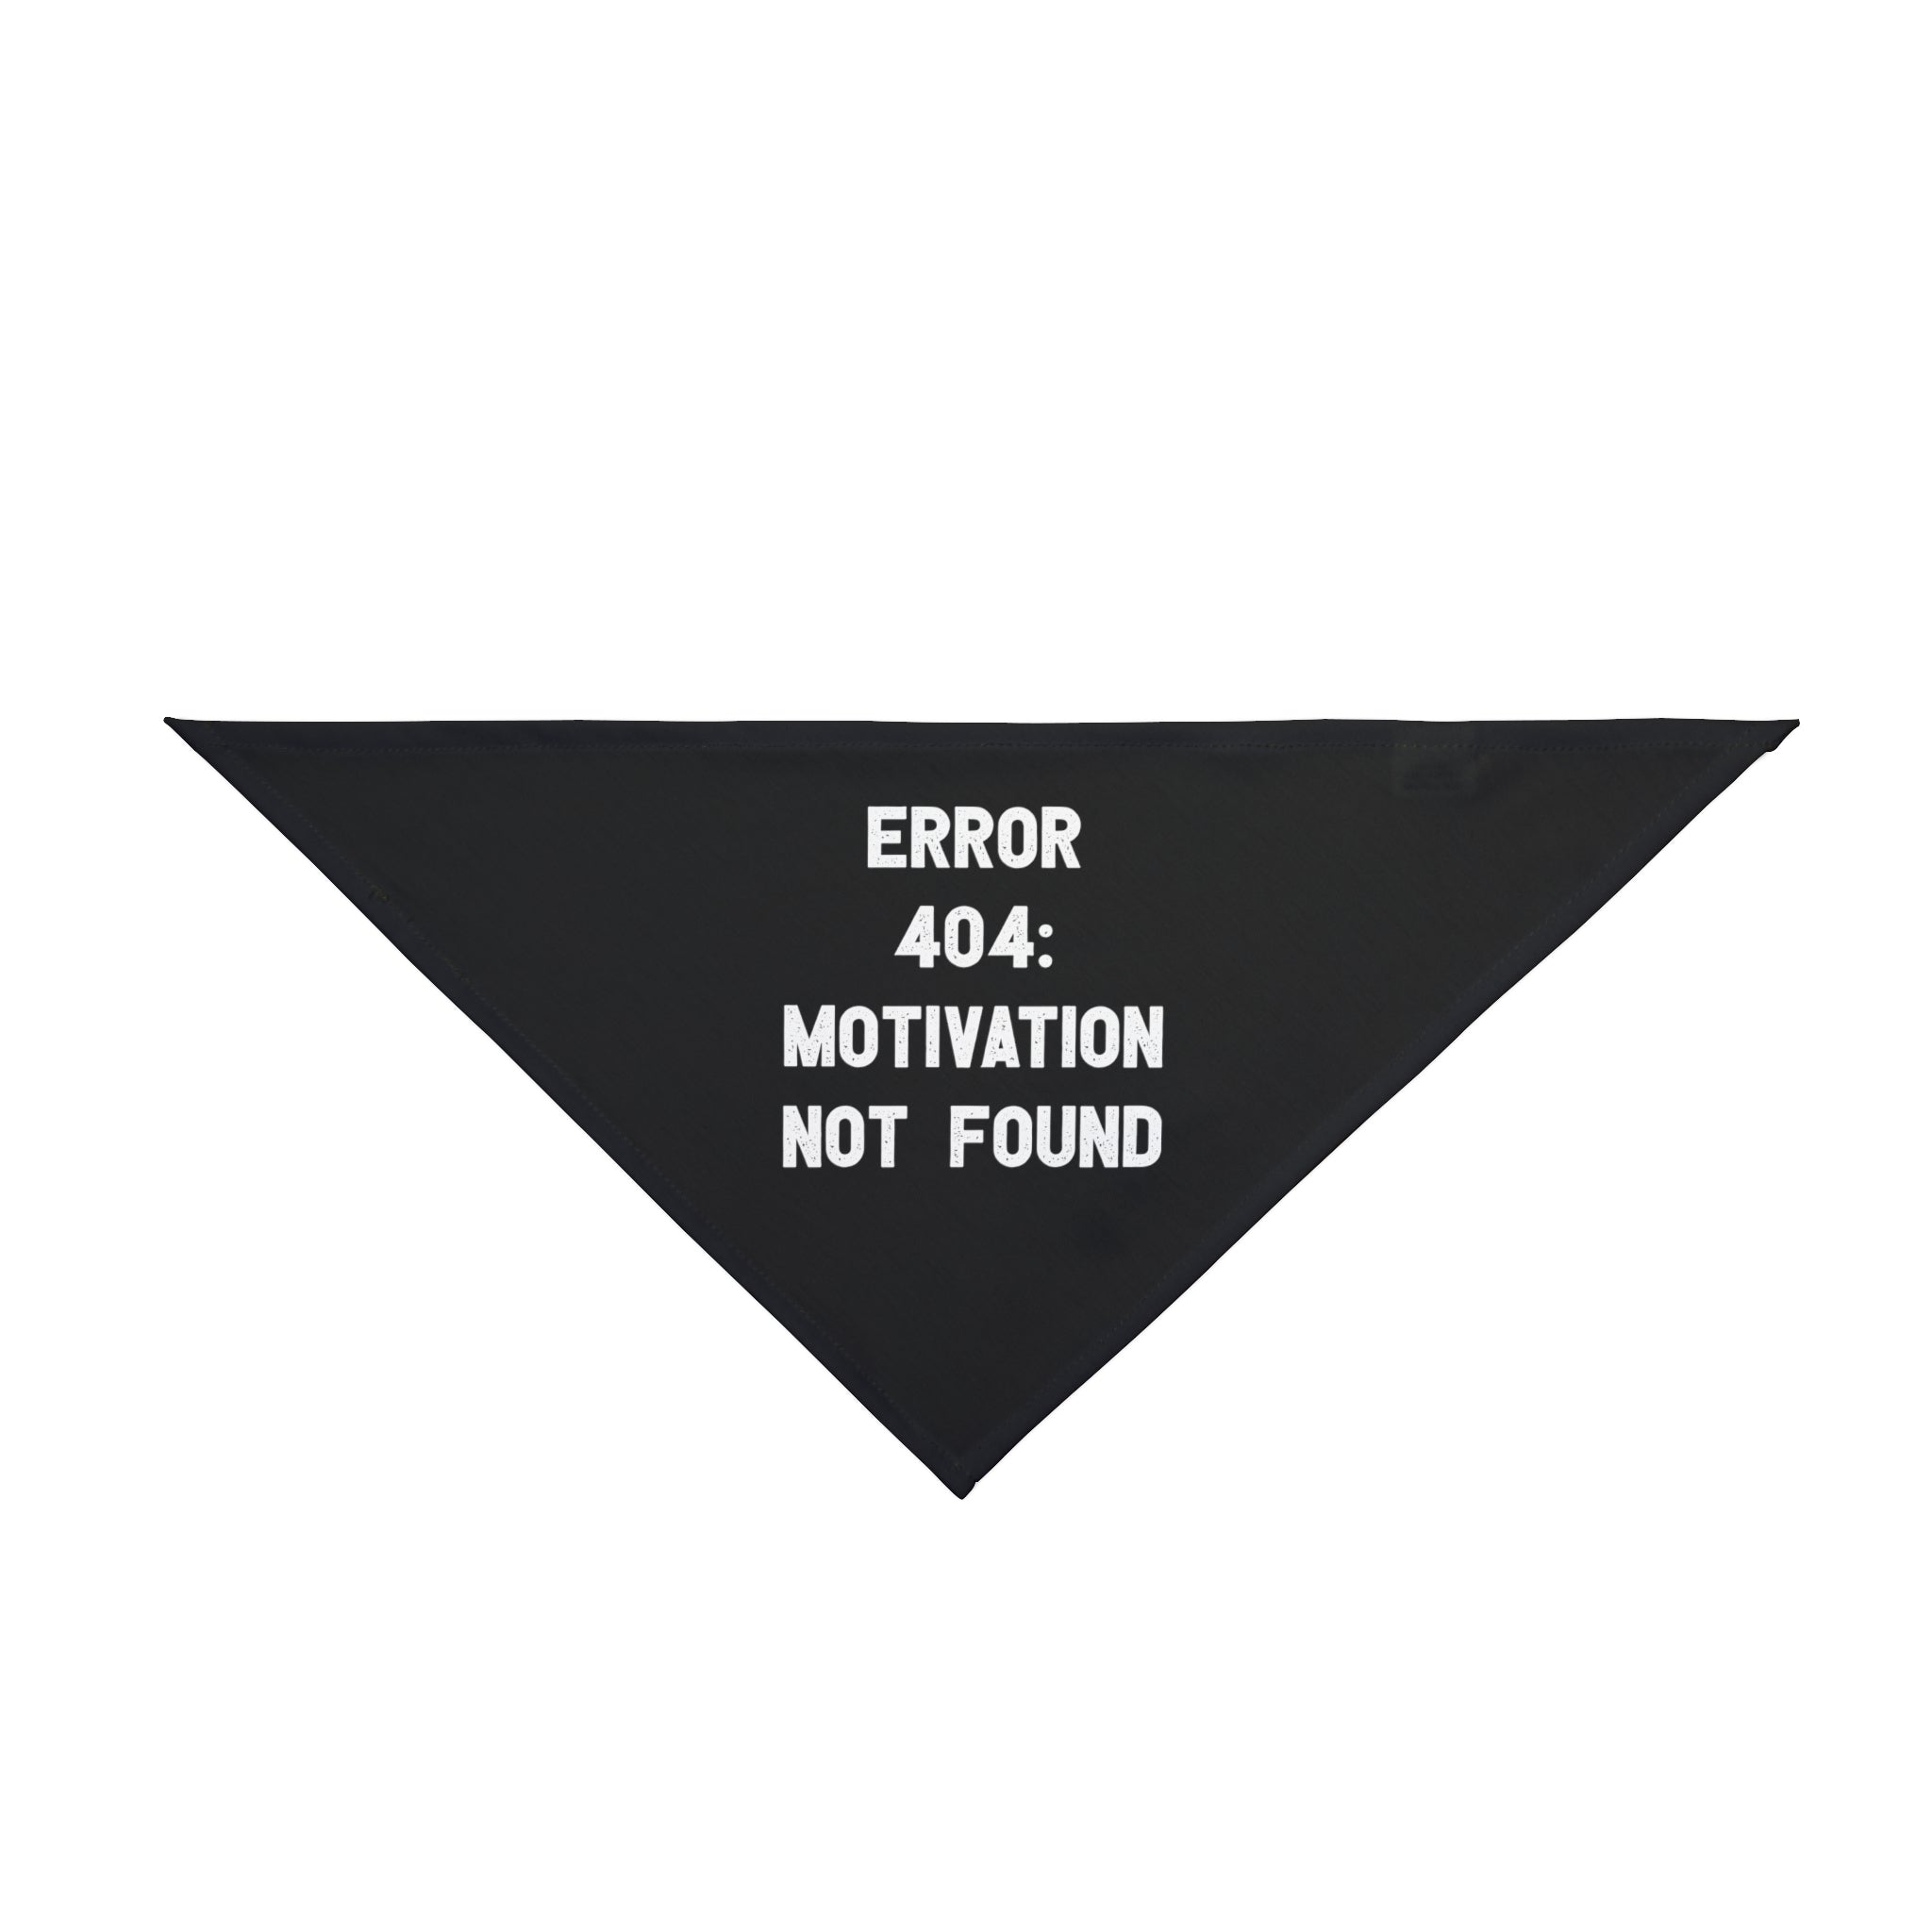 Black triangular cloth made from soft-spun polyester with white text that reads "ERROR 404: MOTIVATION NOT FOUND." This **Error 404: Motivation not found - Pet Bandana** offers your furry friend pet-friendly comfort while making a fun statement.